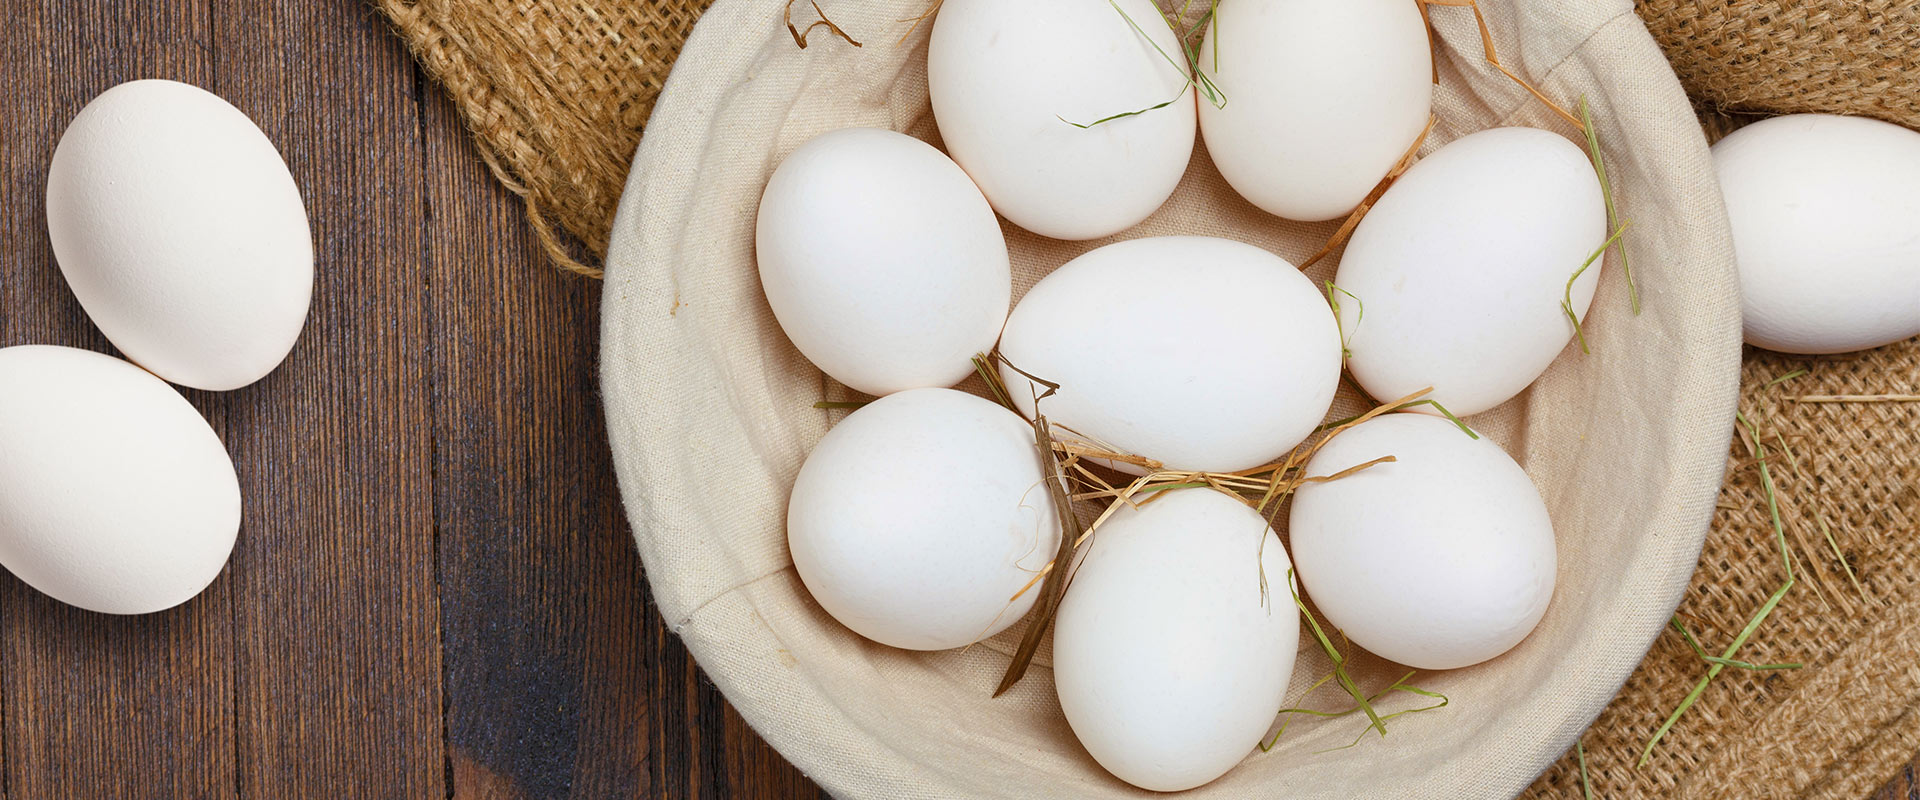 Learn about the benefits of nutritious eggs